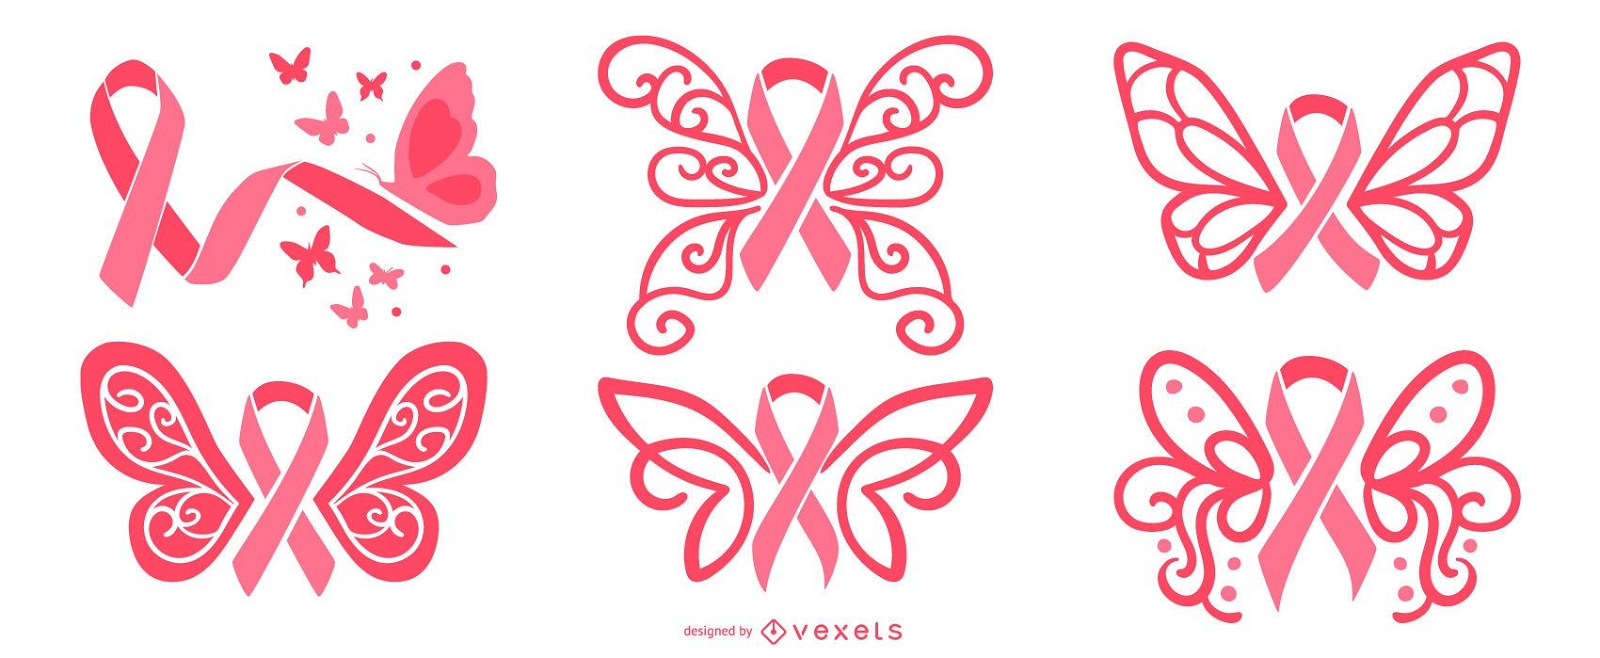 Breast Cancer Butterfly Tattoos